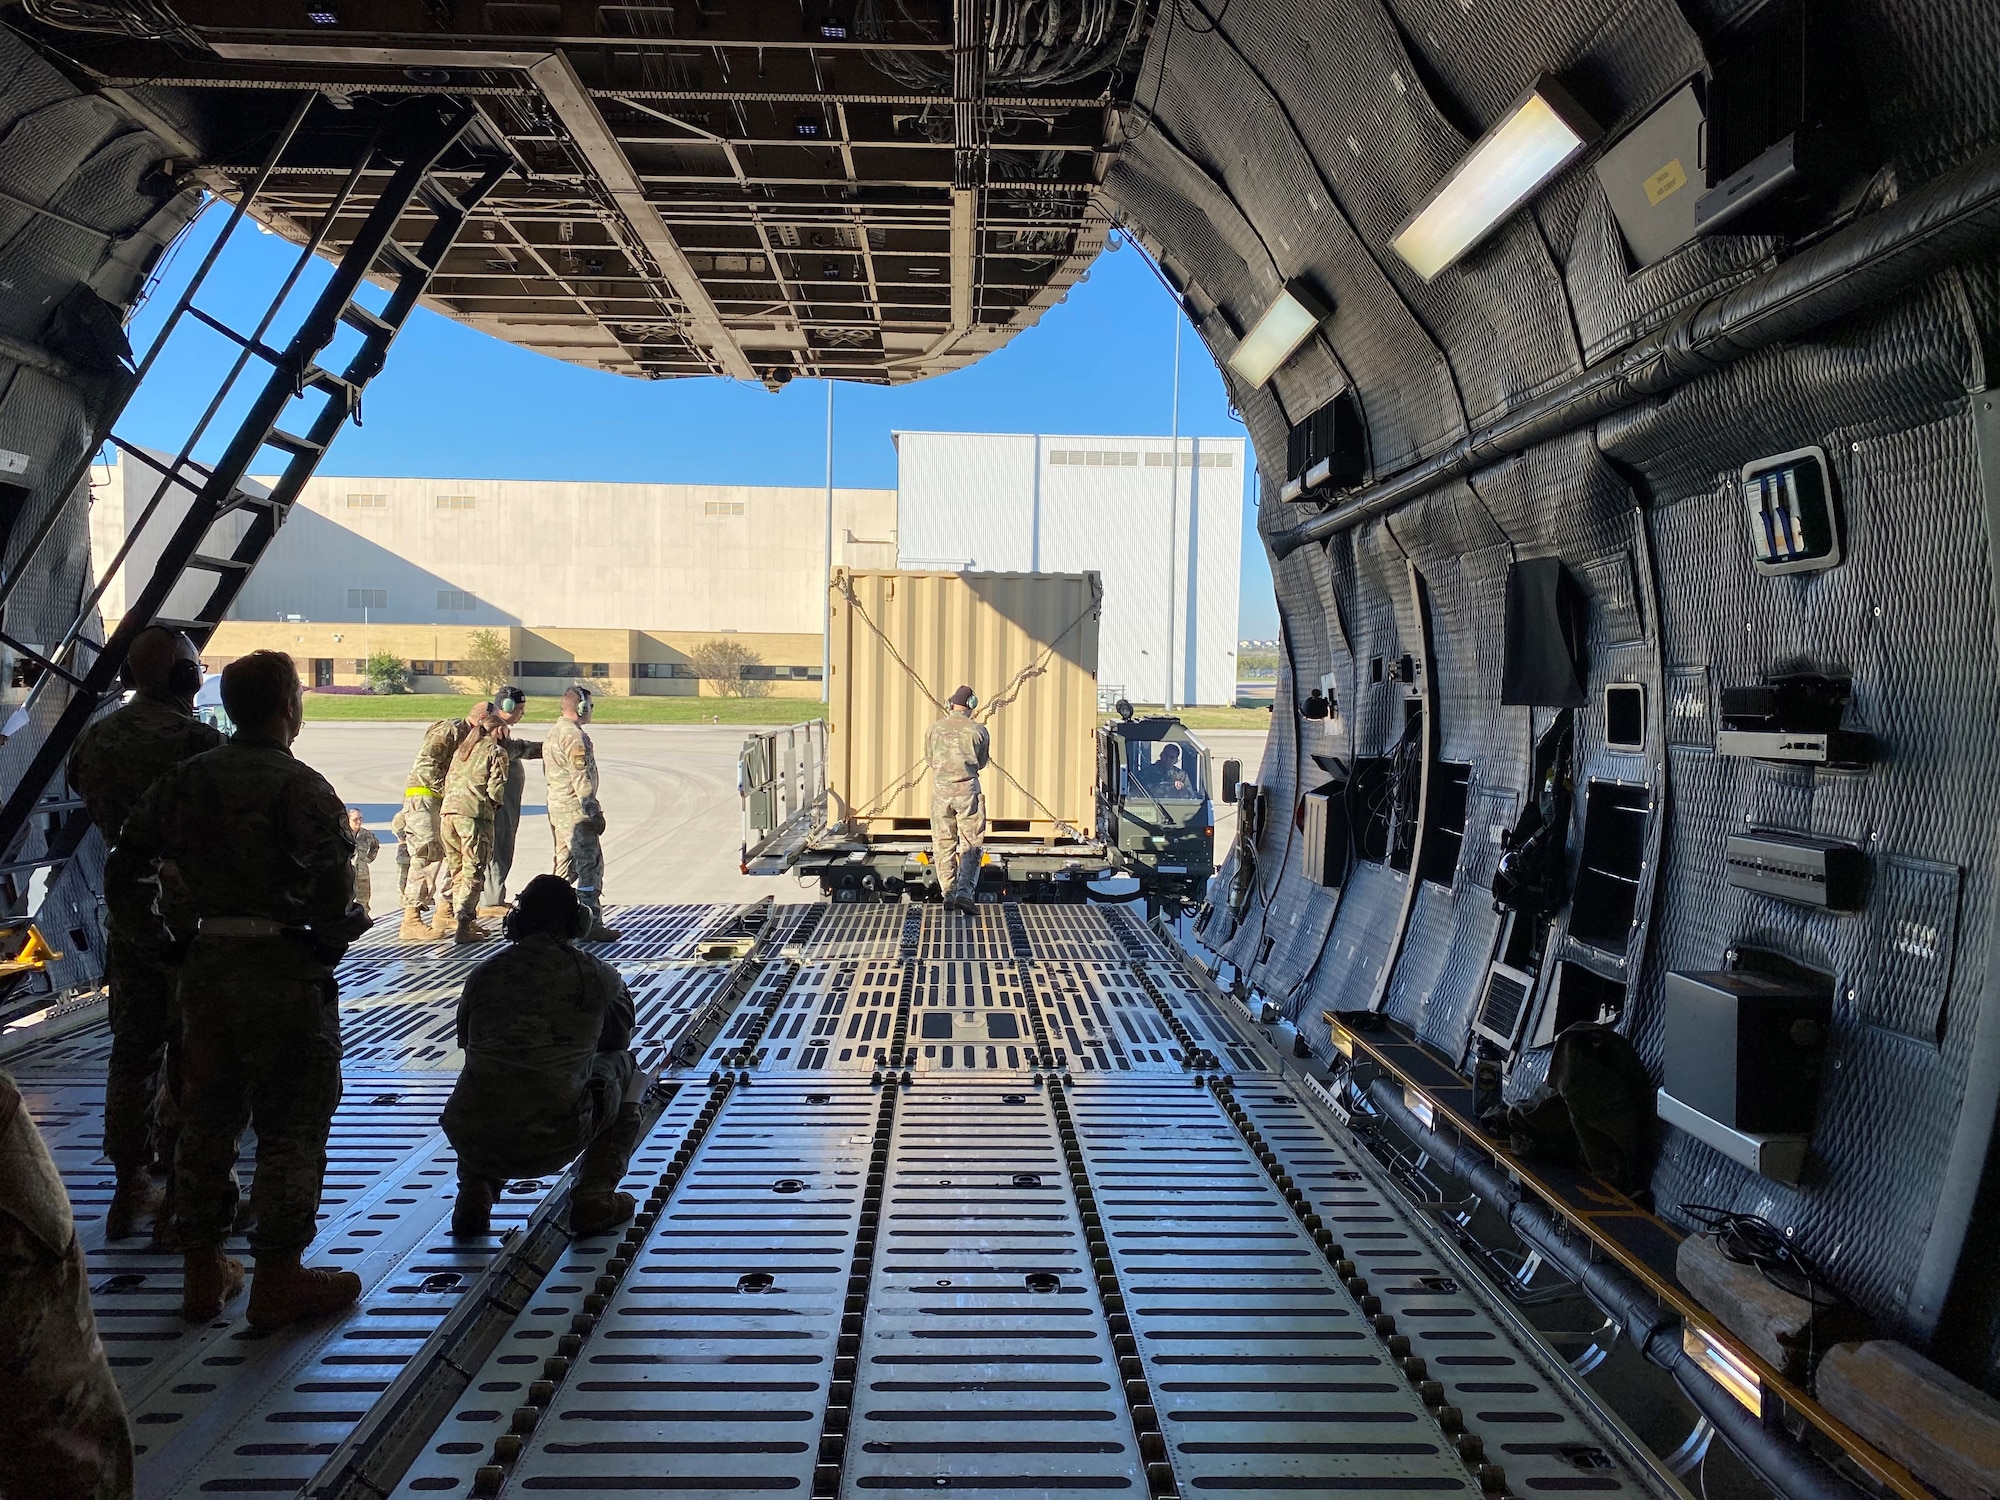 A 68th Airlift Squadron loadmaster guides a Halvorson Next Generation Small Loader driver as he pulls up to the front of a C-5M Super Galaxy aircraft during a cargo preparation and loading exercise Nov. 7, 2021 at Joint Base San Antonio-Lackland, Texas. The loader is used to transport cargo pallets to and from military and civilian cargo aircraft. (Courtesy photo by Tech. Sgt. John Shue)